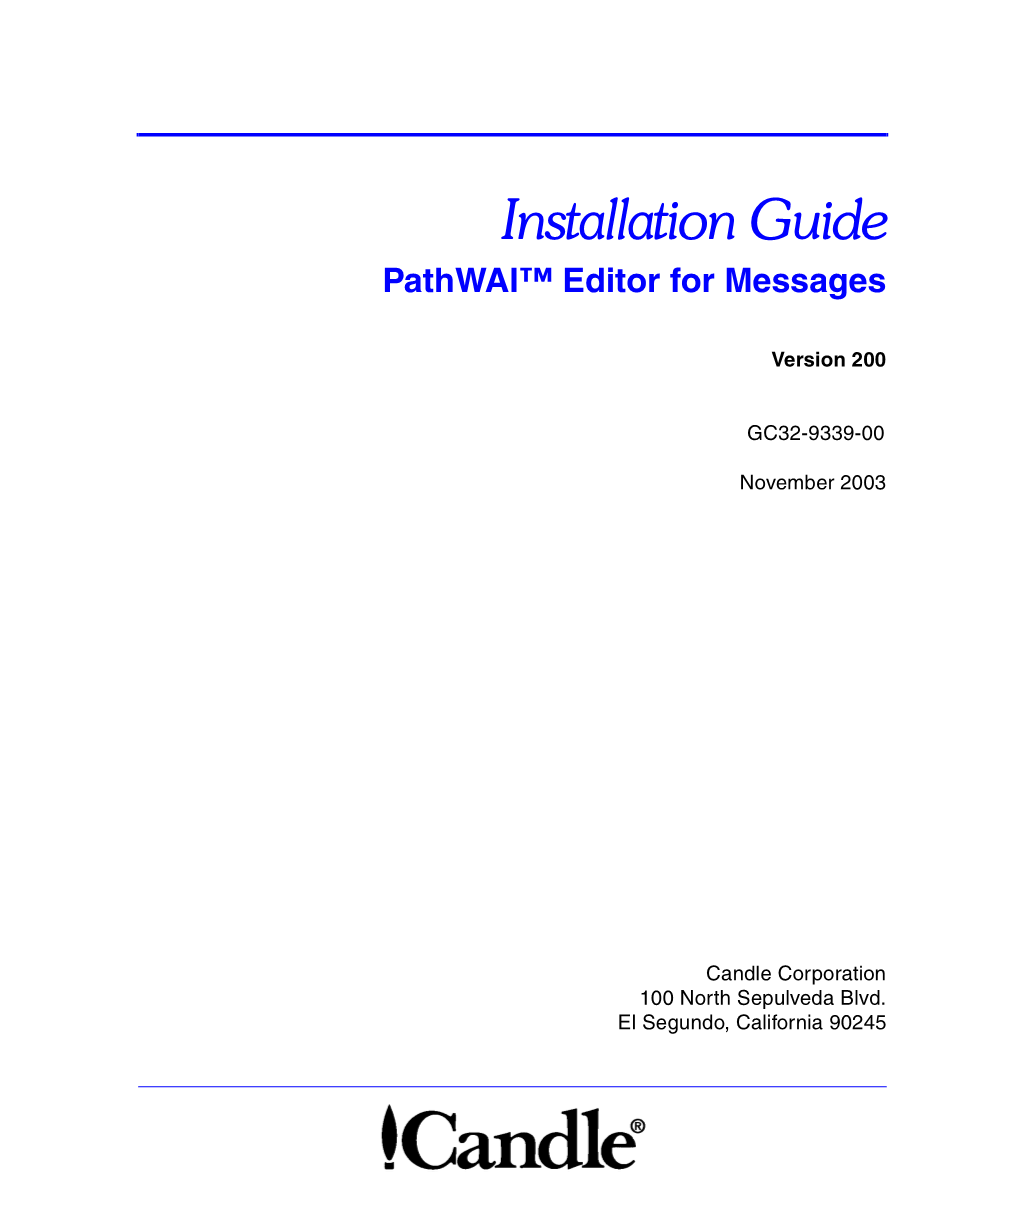 Pathwai Editor for Messages Installation Guide, Version 200 Step 1